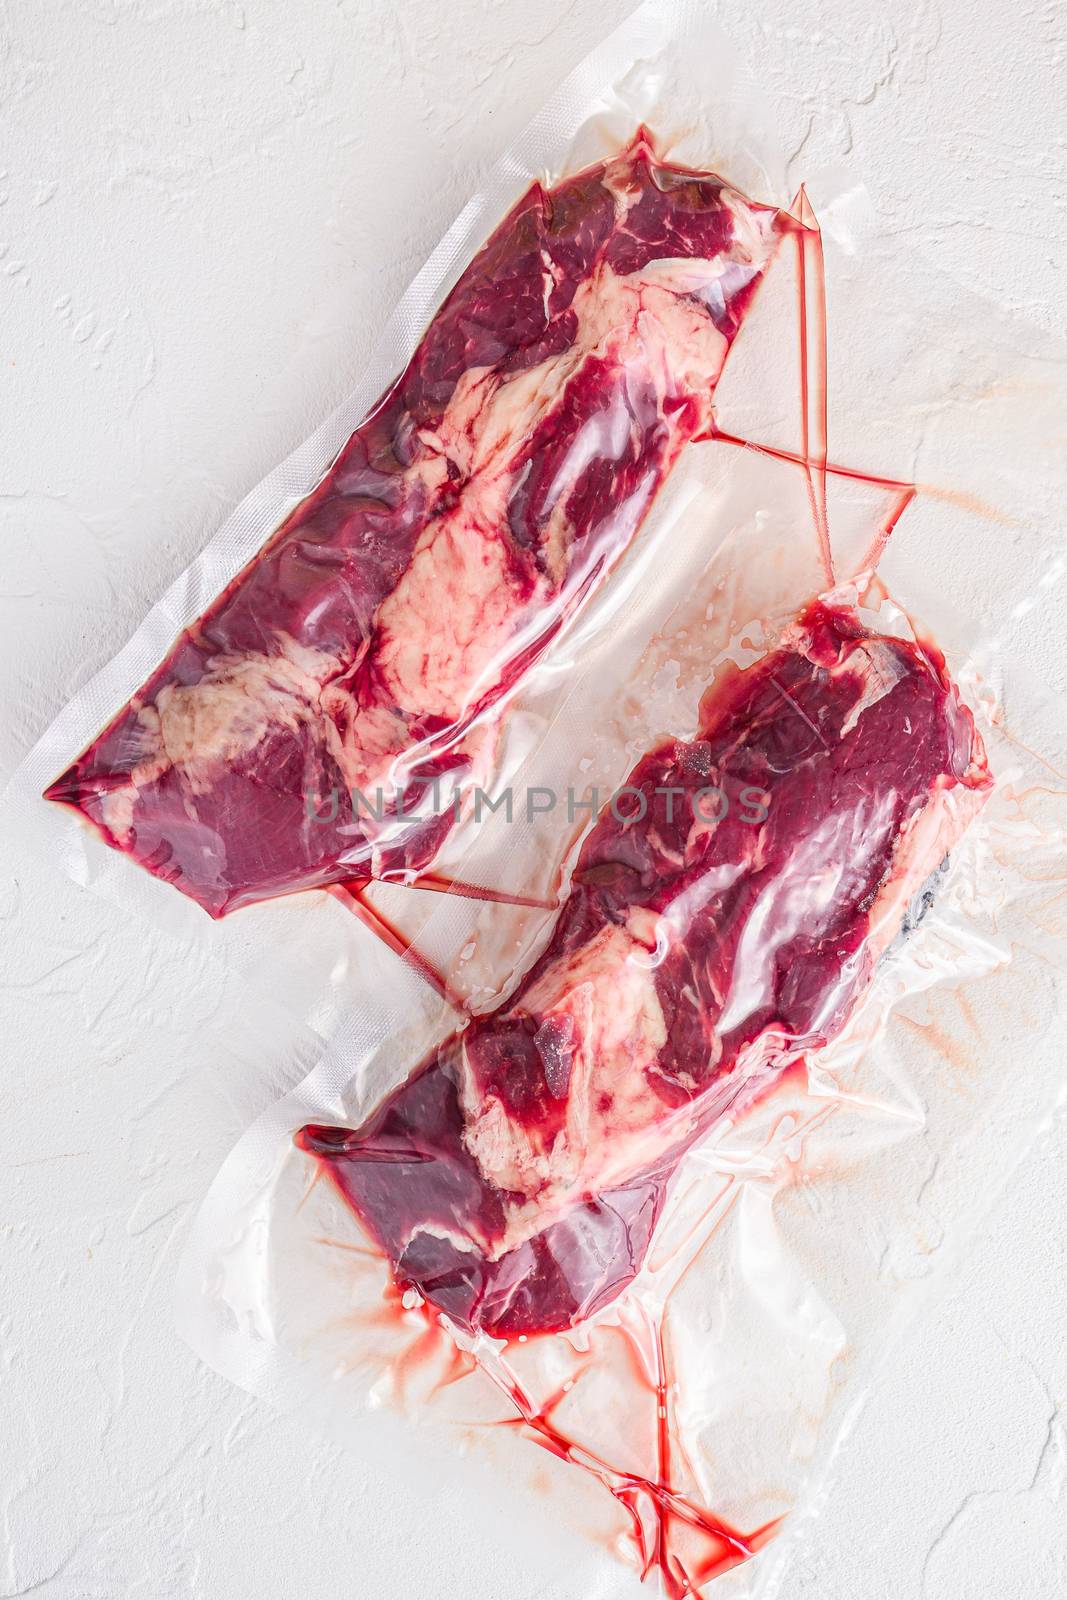 Pair of chuck roll beef steak, vacuum packed organic meat for sous vide cooking on white concrete textured background, top view